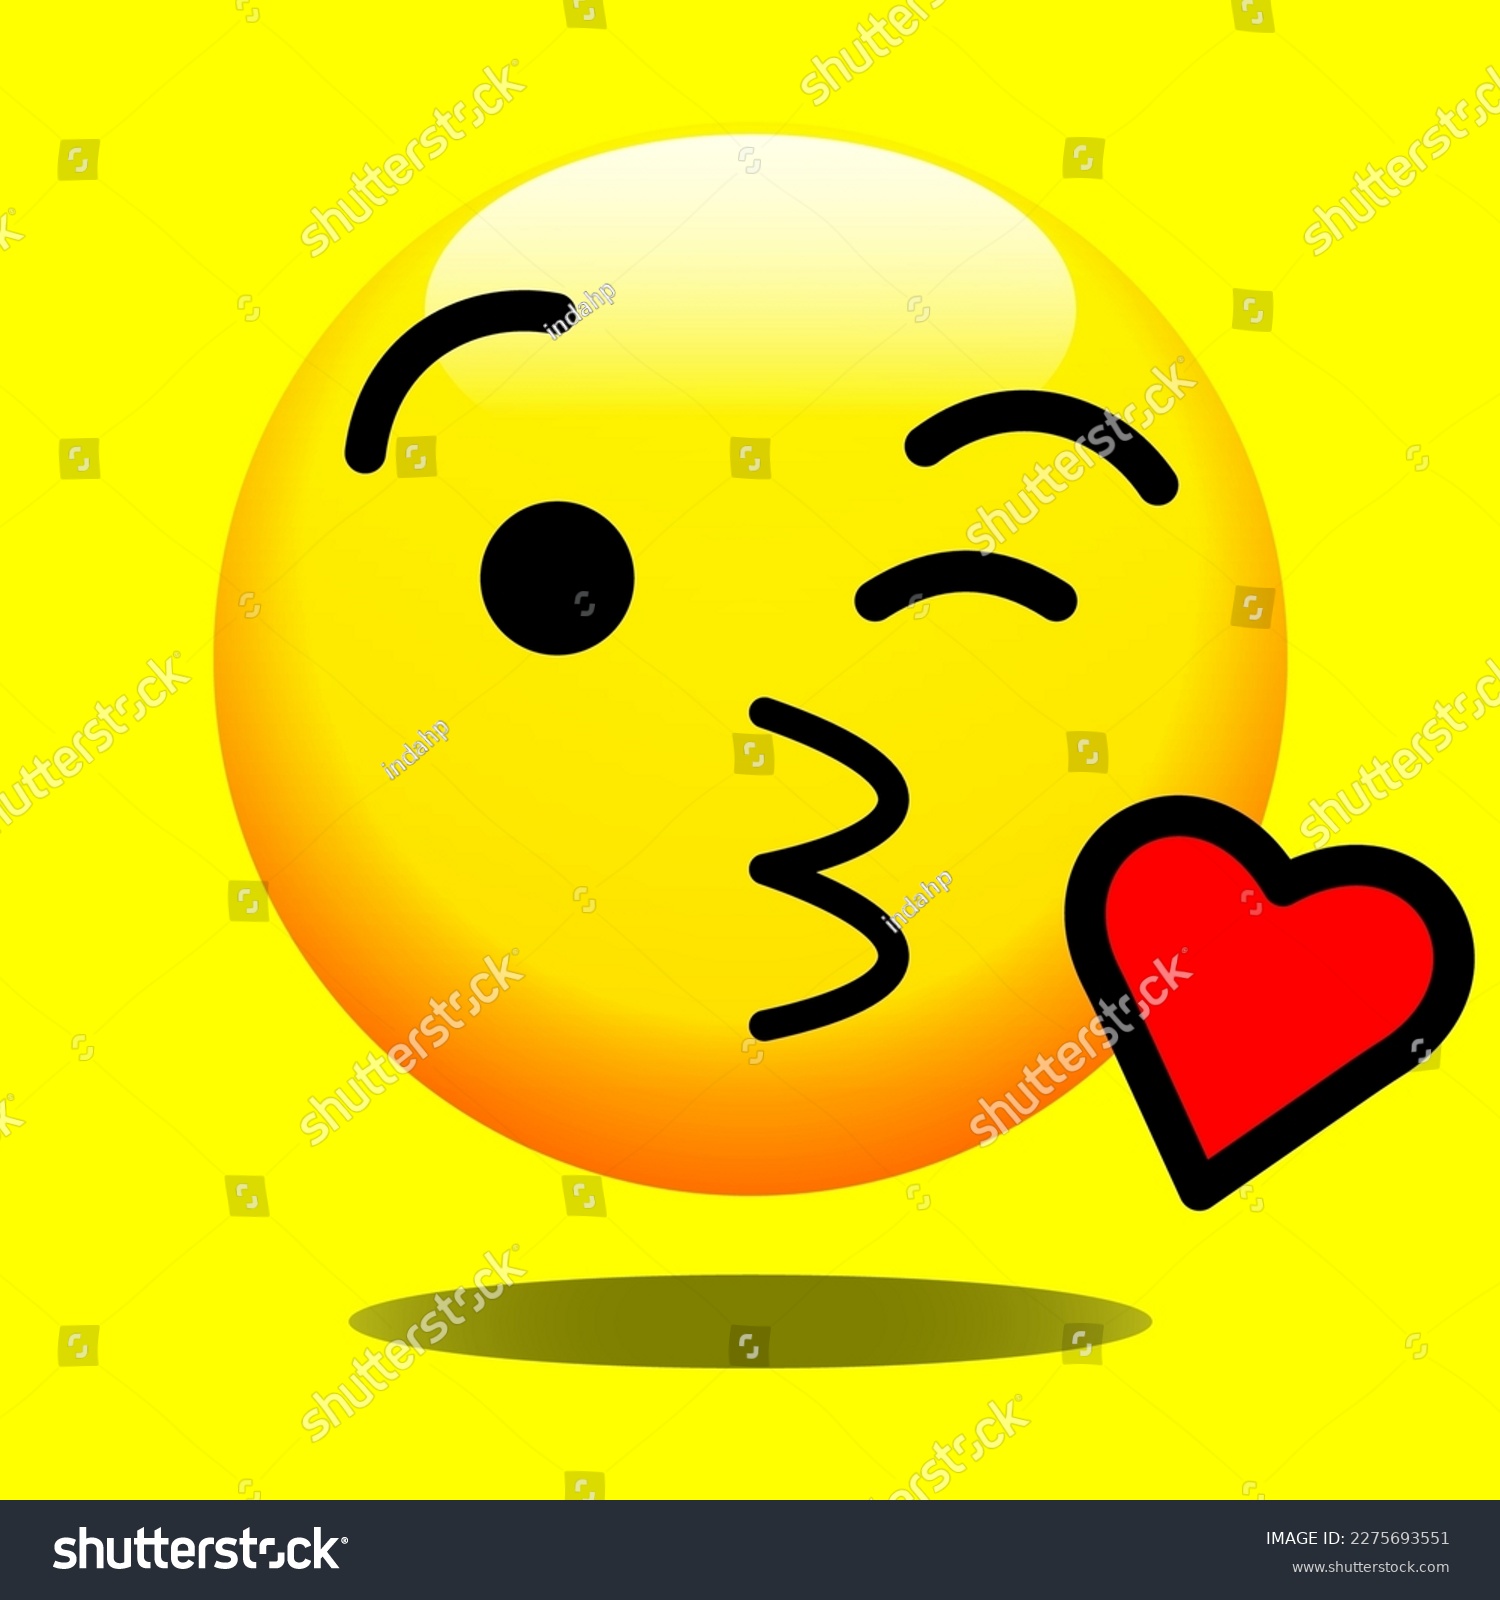 SVG of Face blowing a kiss vector flat icon. Isolated face blowing a kiss emoji illustration svg